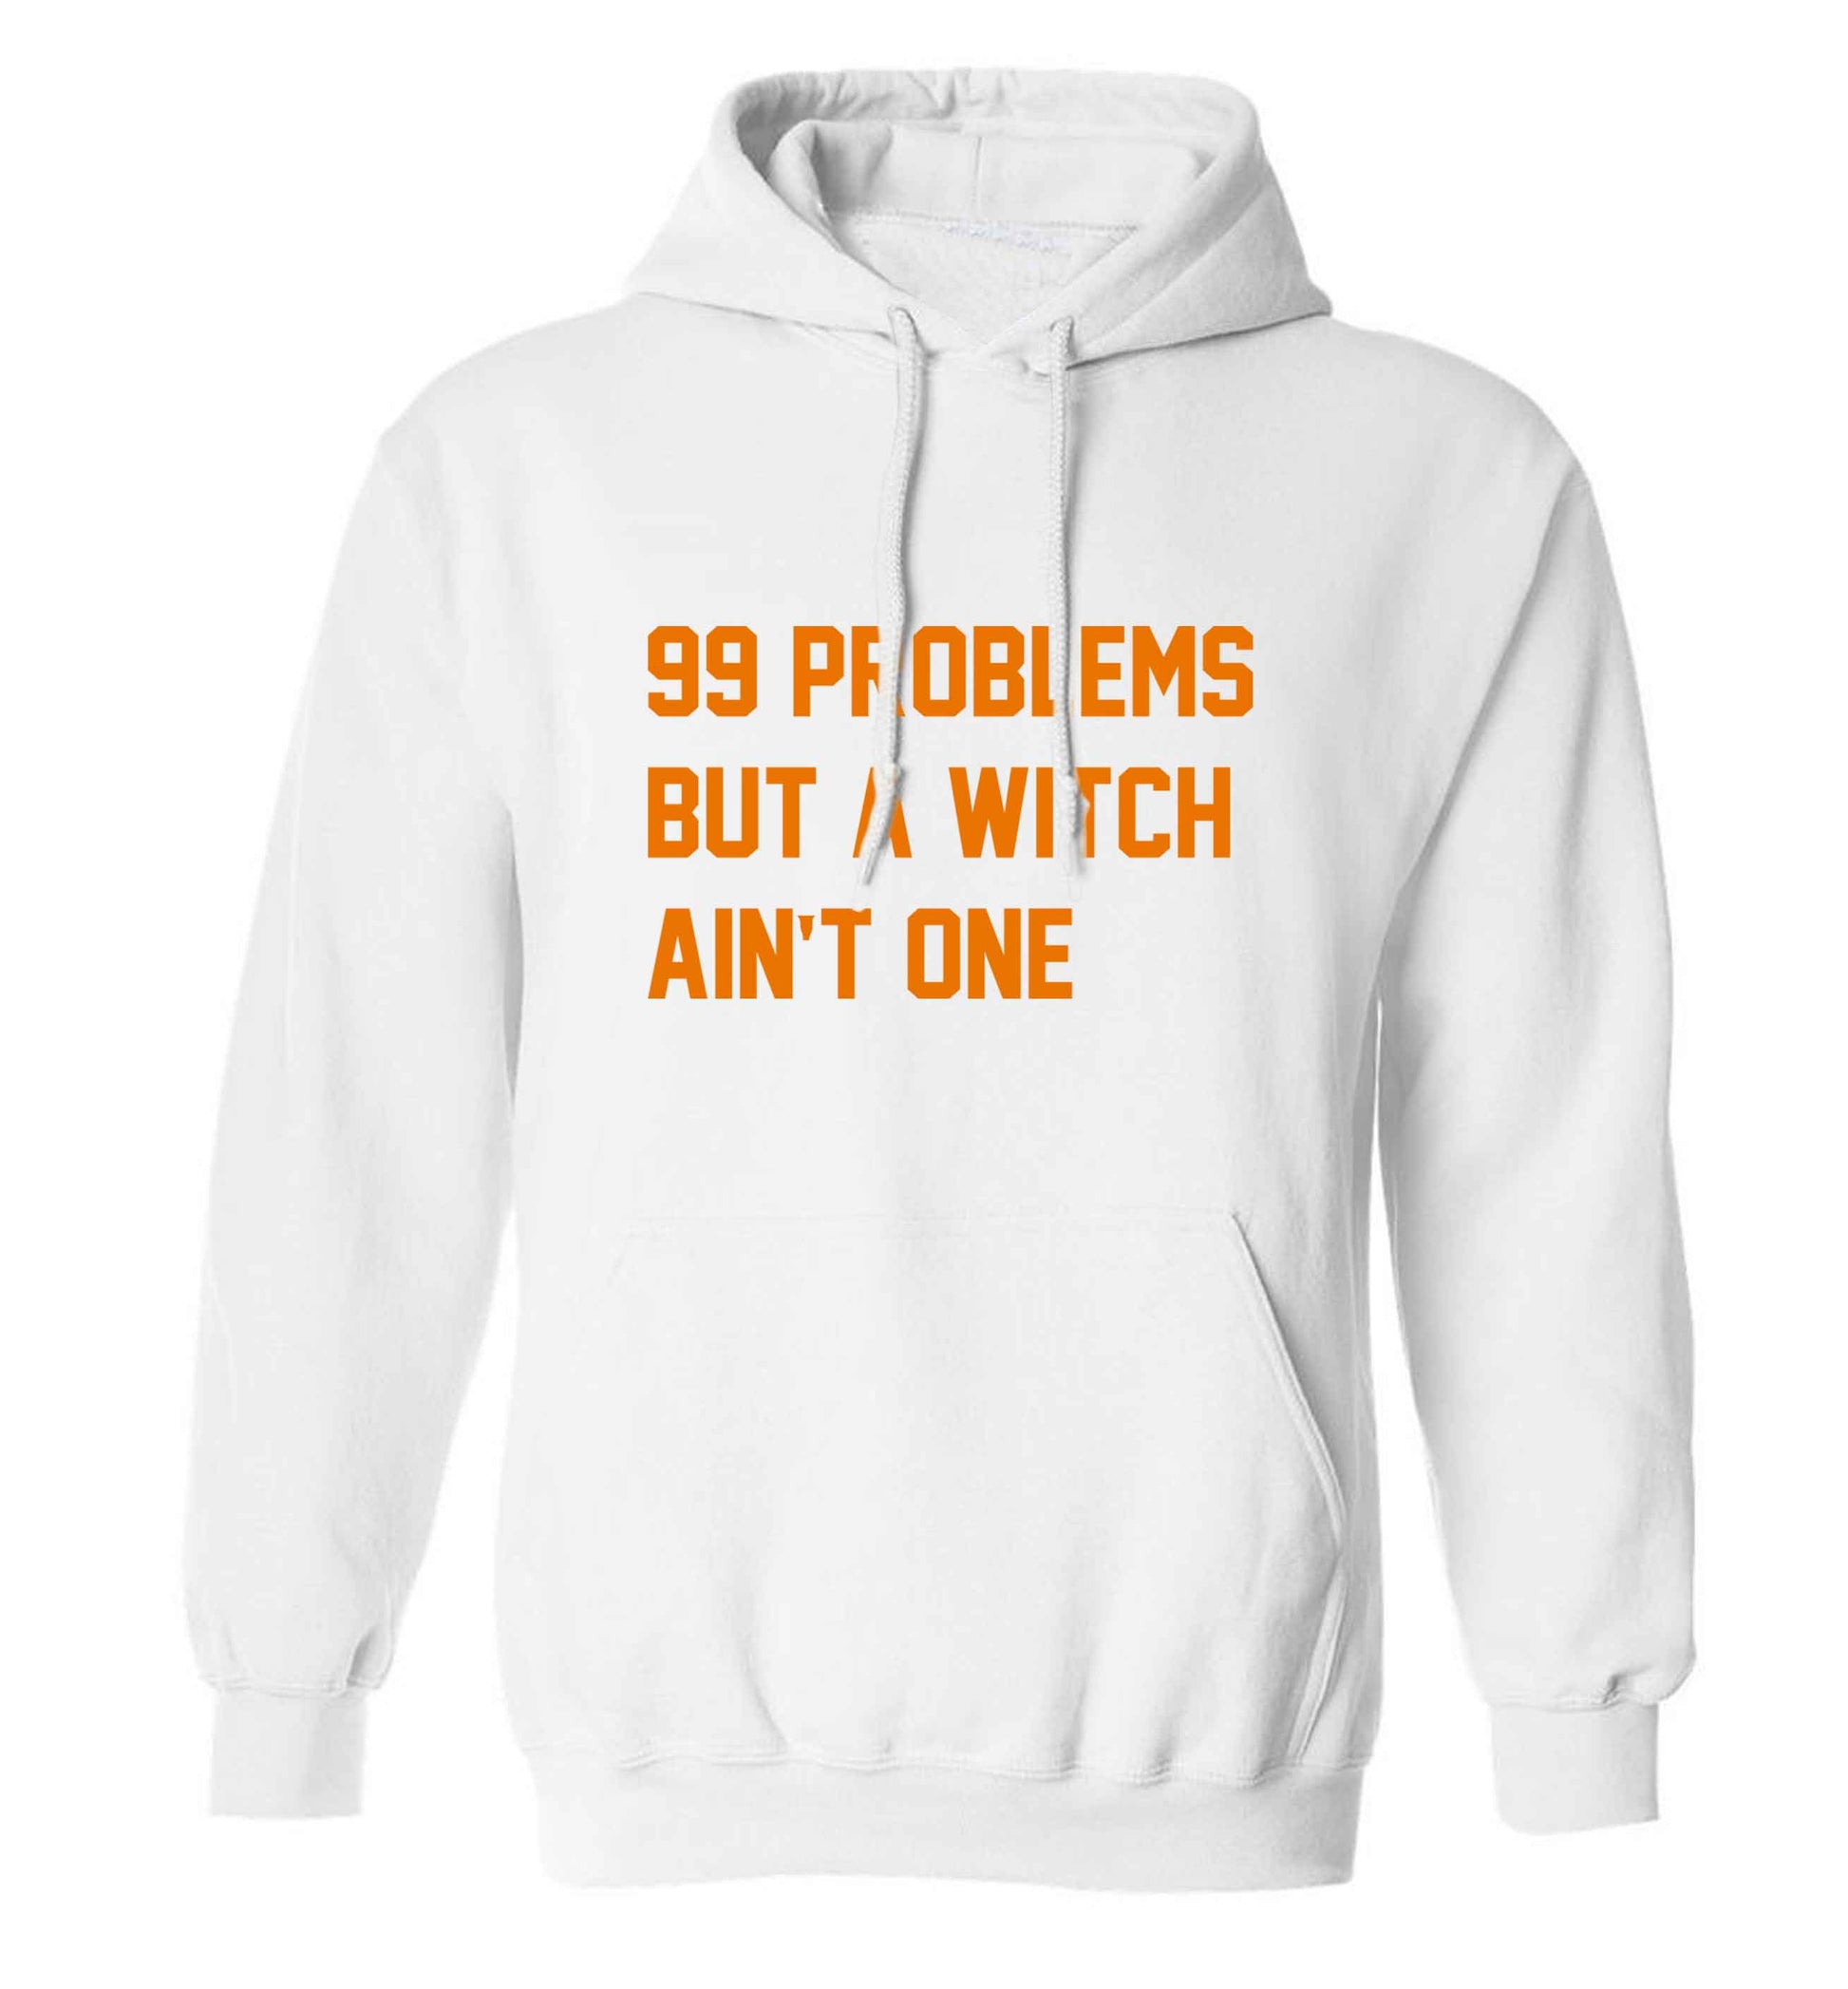 99 Problems but a witch aint one adults unisex white hoodie 2XL